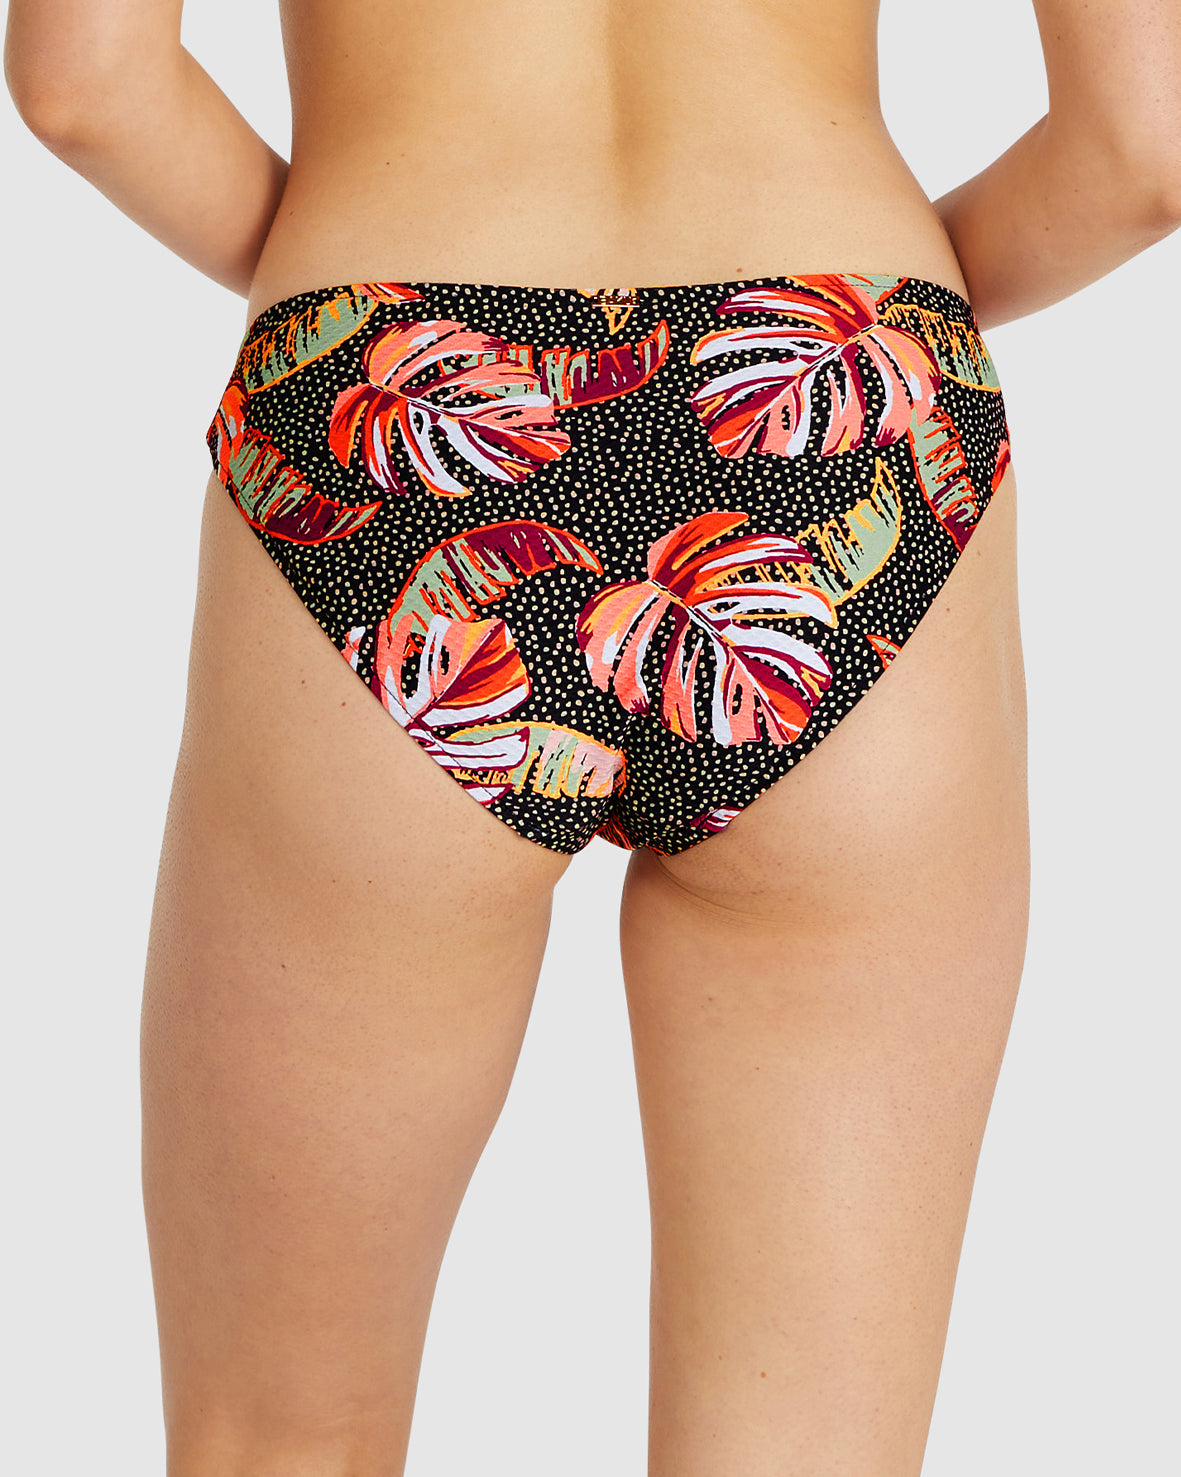 Feel the sun on your skin with the Vatulele D-DD Cup Twist Bikini! This luxurious Spanish fabric is perfect for a beach-goer looking for something unique and exotic. Dive into the tropics in Vatulele's signature jungle fusion!